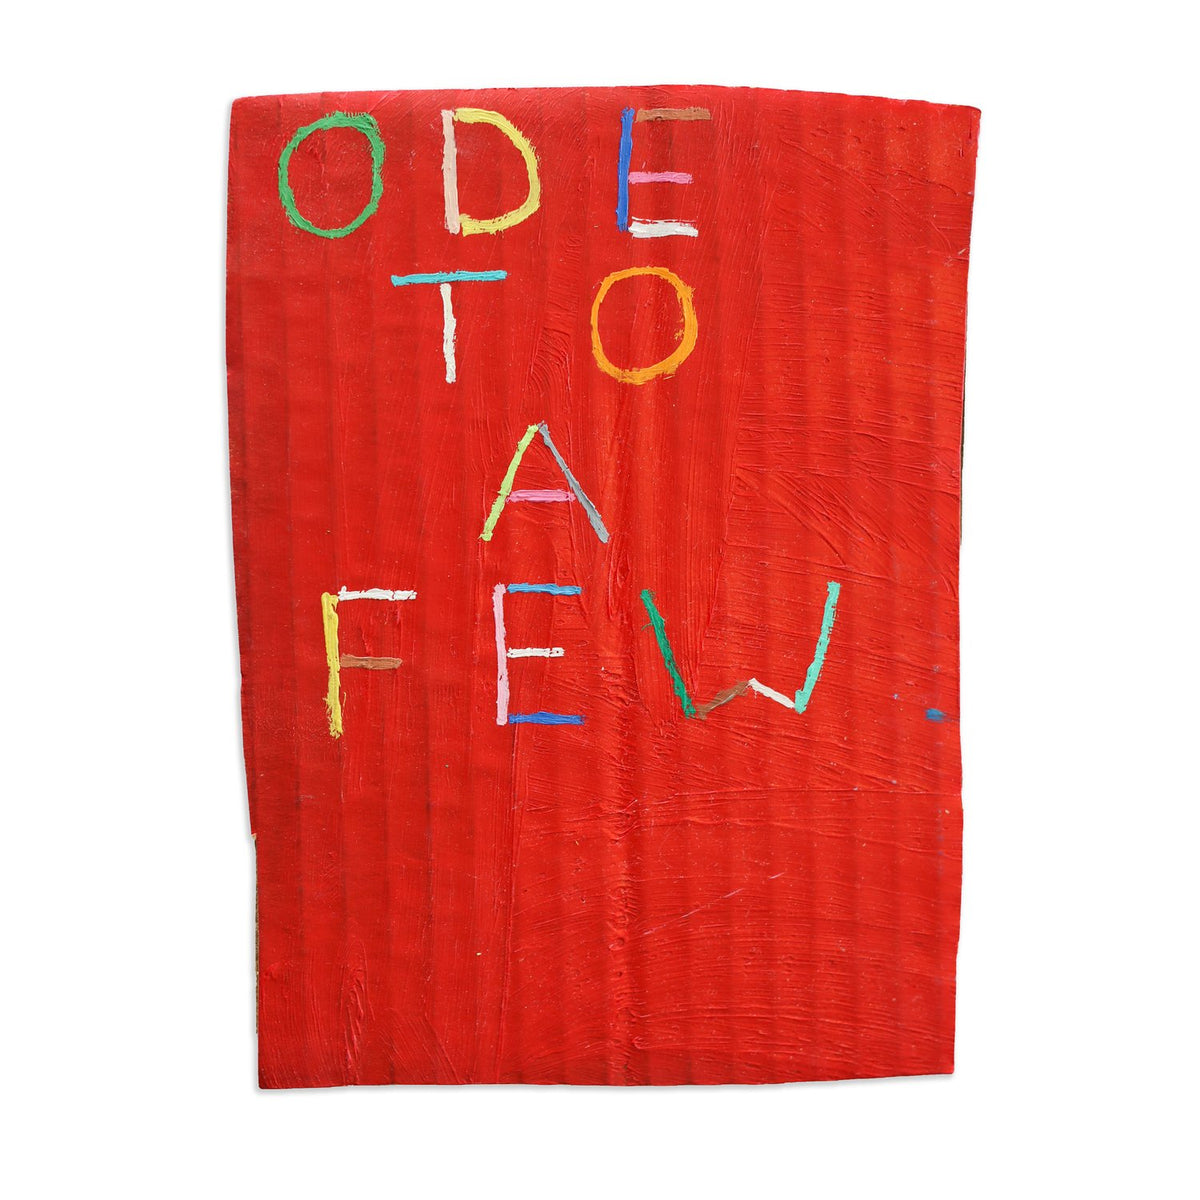 James Hale | ODE TO A FEW (RED)